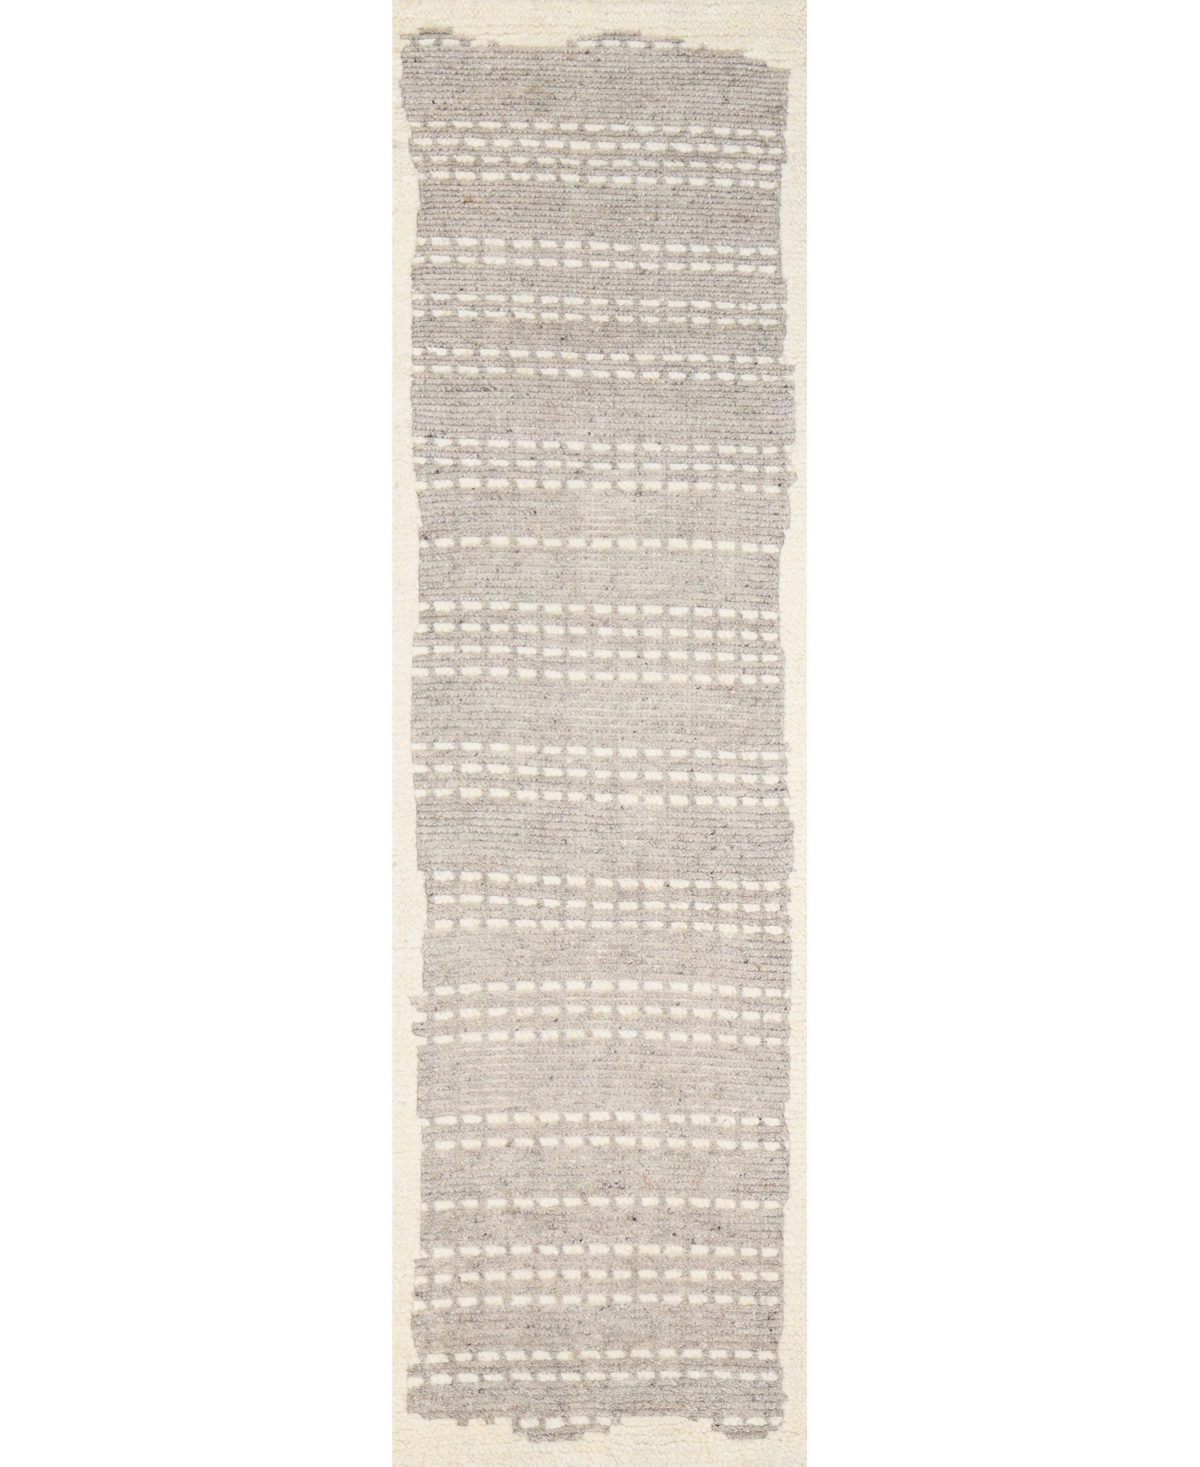 Bb Rugs Natural Wool Nwl26 2'6" X 8' Runner Area Rug In Gray